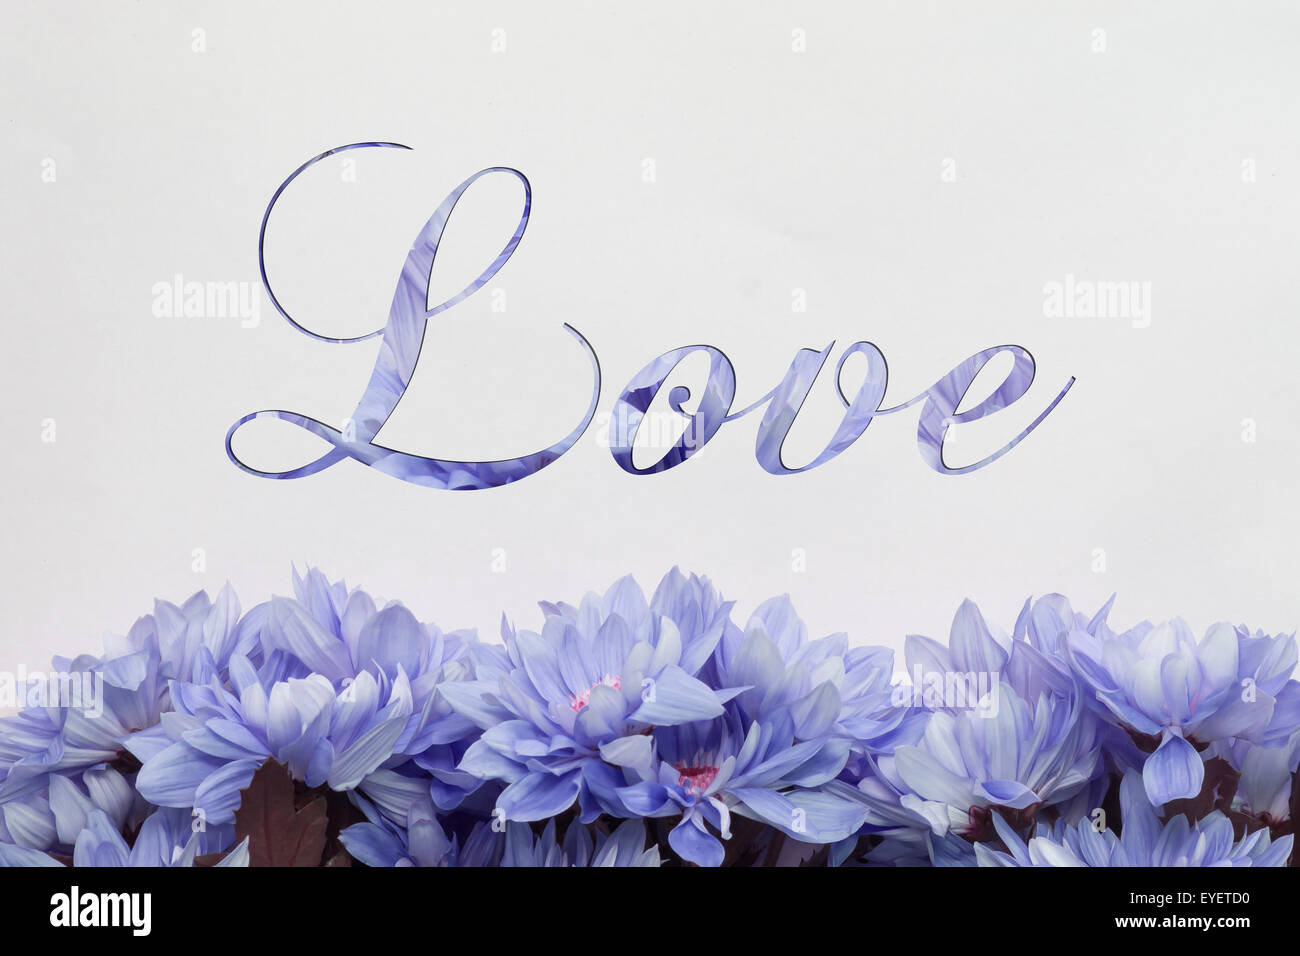 Love flowers - handwritten text and lovely flower decoration Stock Photo